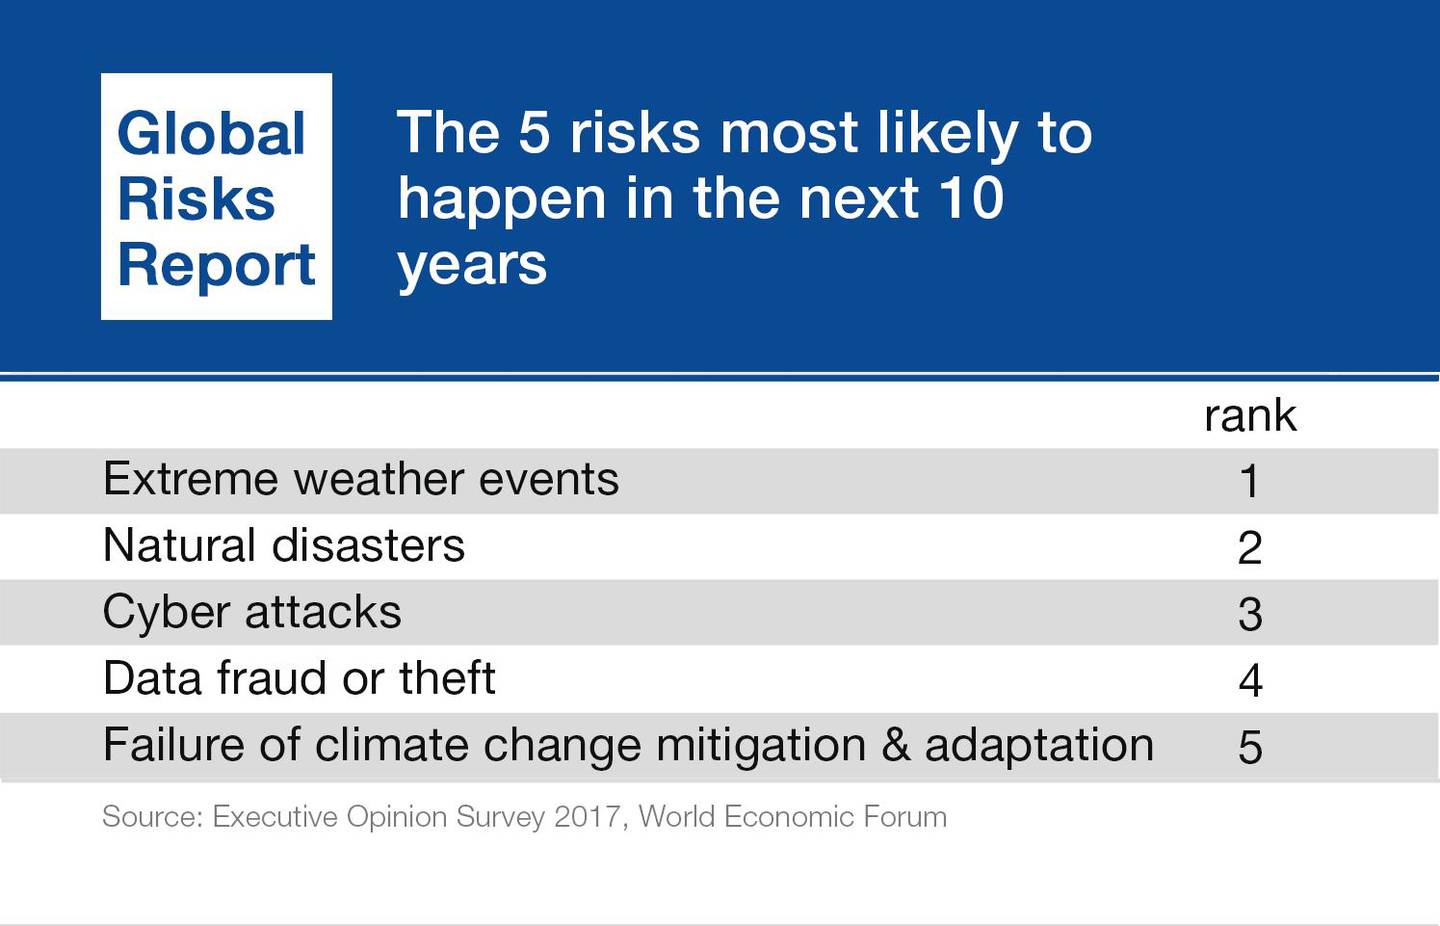 Extreme weather was seen as the most likely risk in the next ten years. WEF